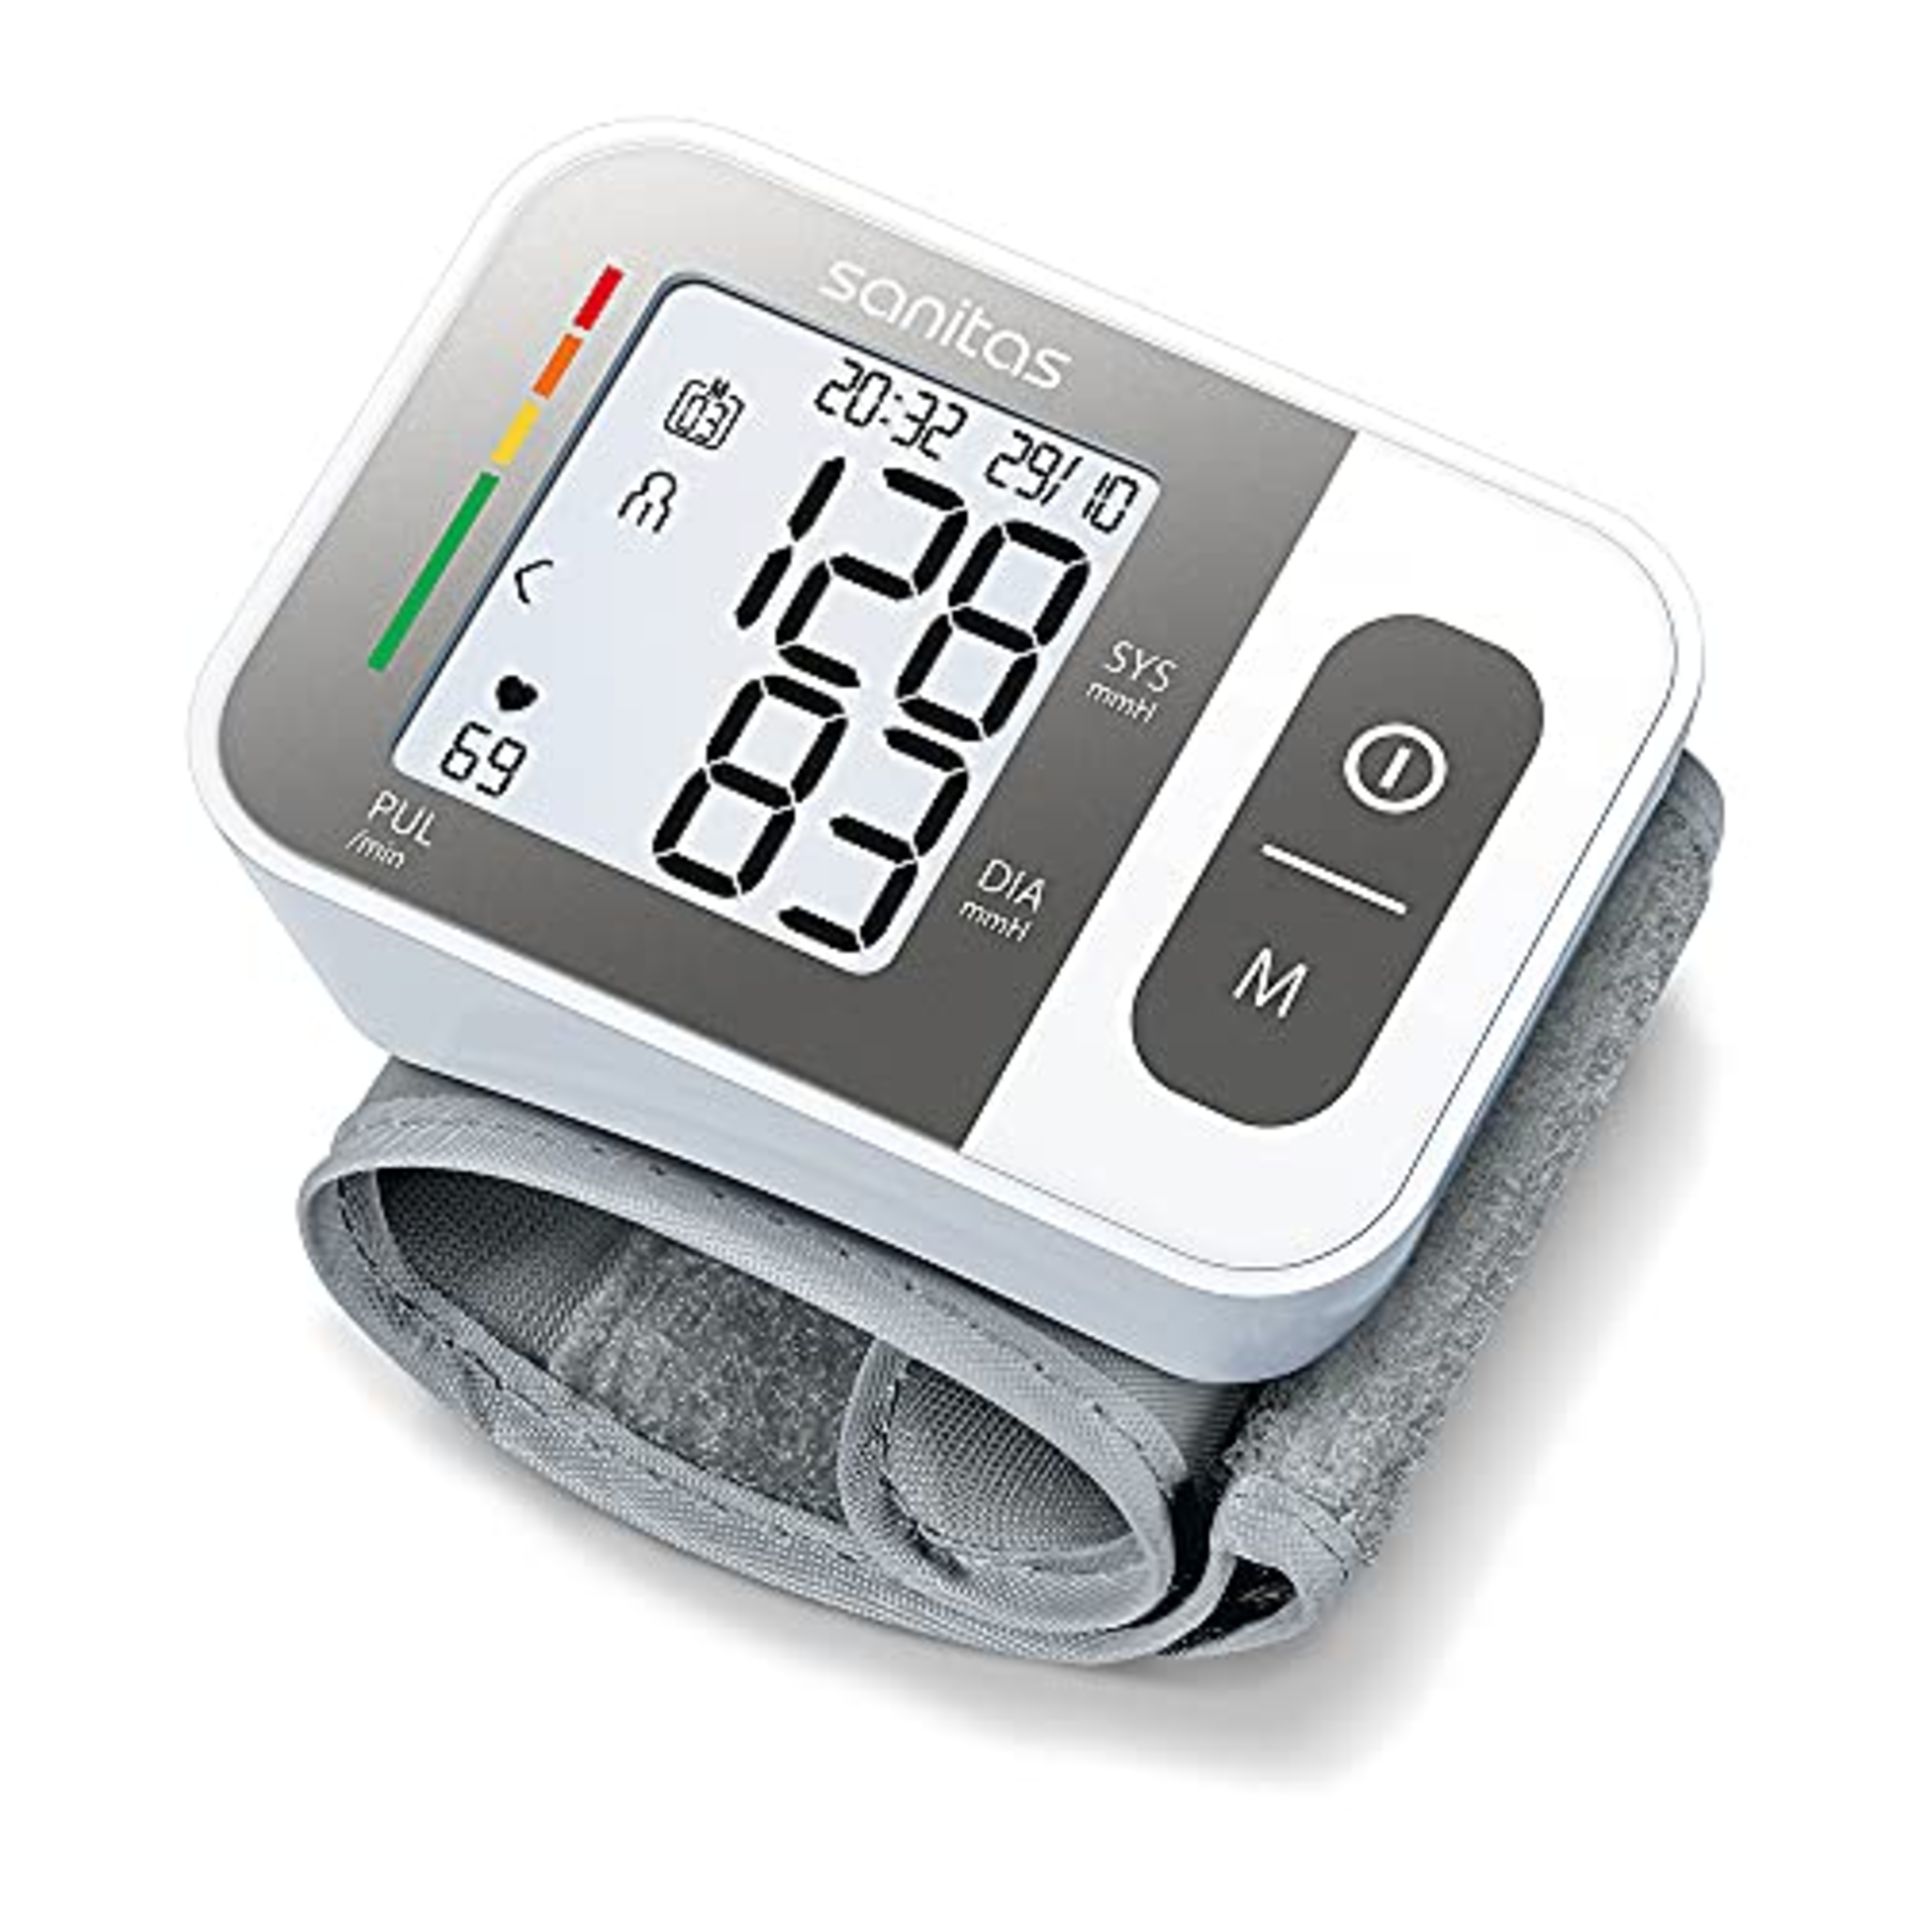 Sanitas SBC 15 wrist blood pressure monitor, fully automatic blood pressure and pulse - Image 4 of 6